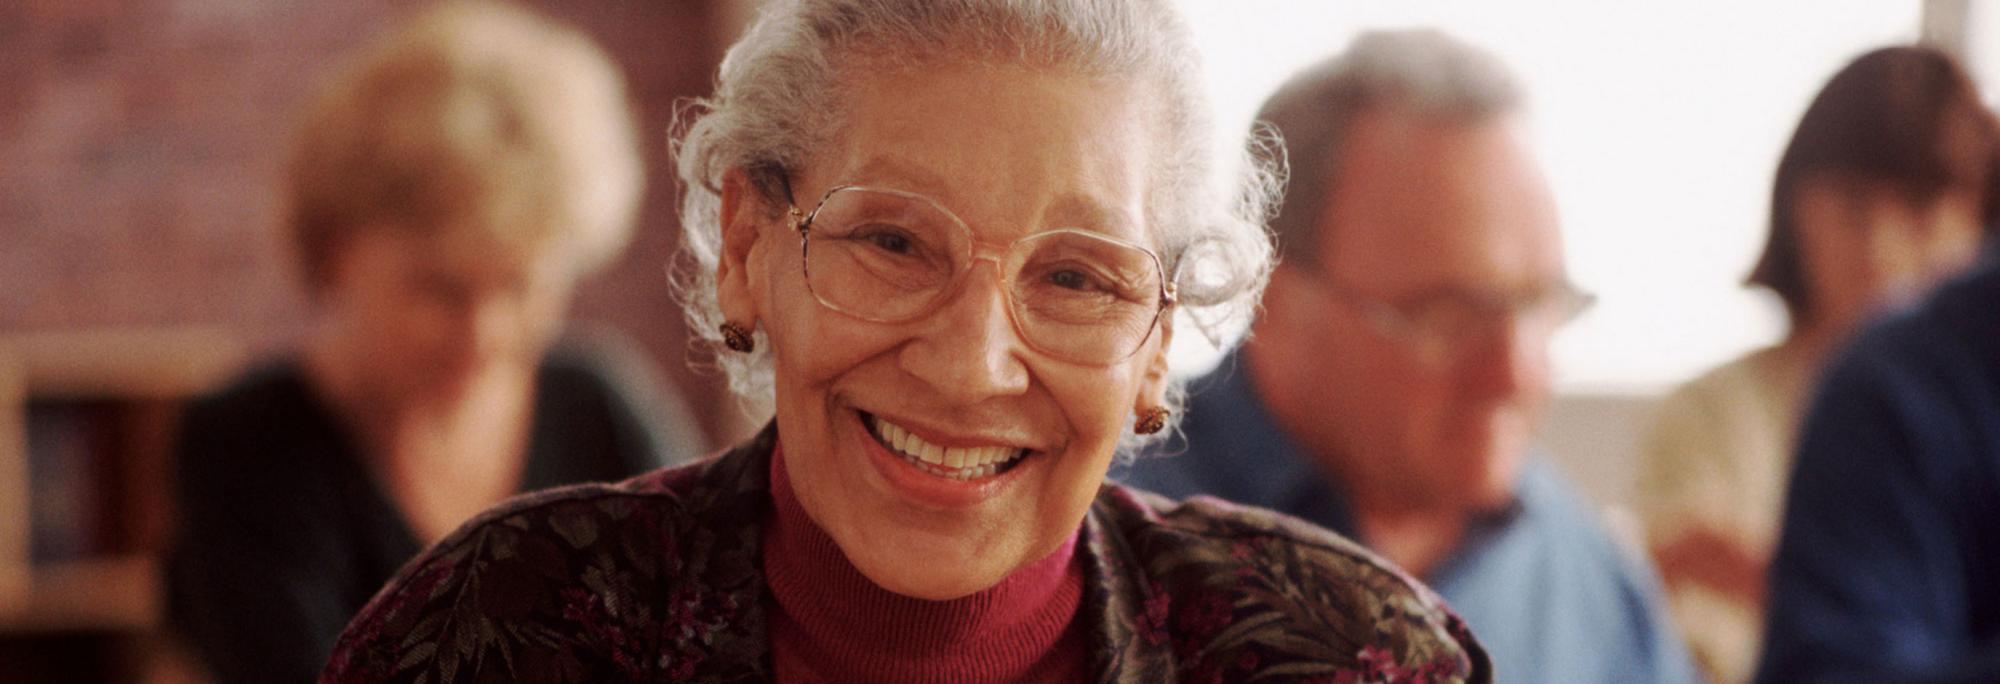 Elderly adult female smiling in classroom.